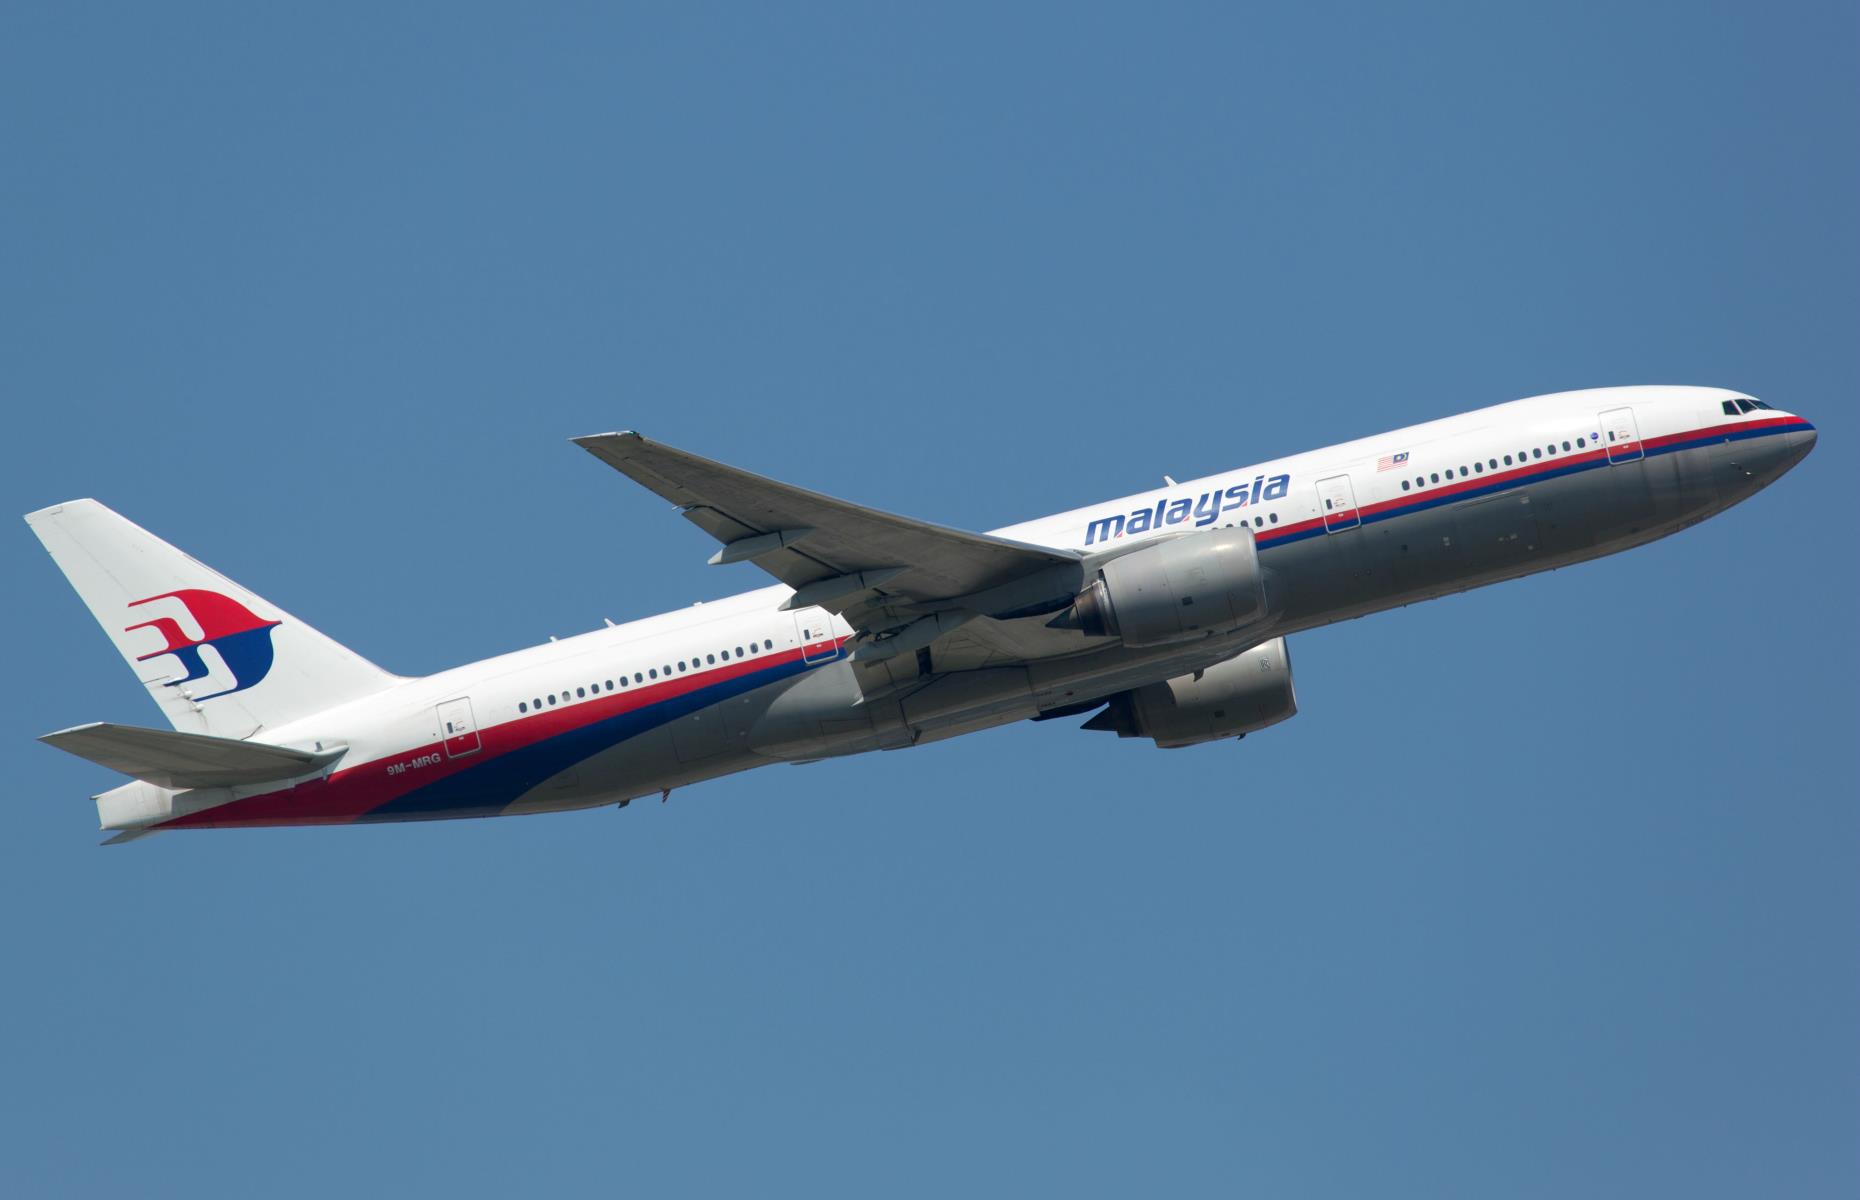 2014: Malaysia Airlines Flight 370 goes missing